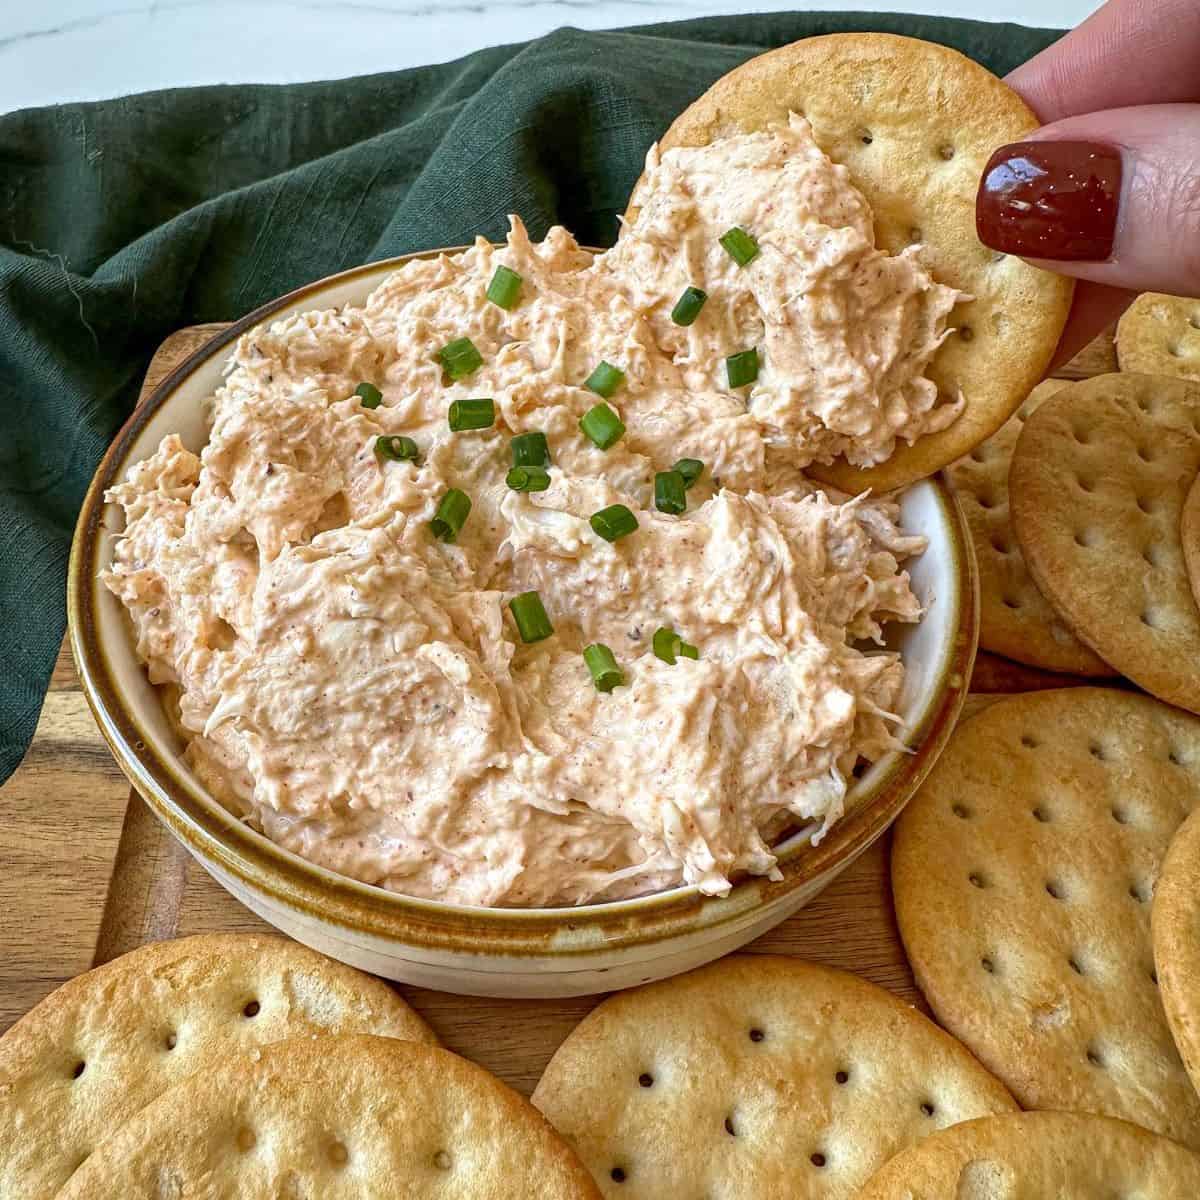 Pale pink cream cheese style dip sprinkled with chives and surrounded by crackers.